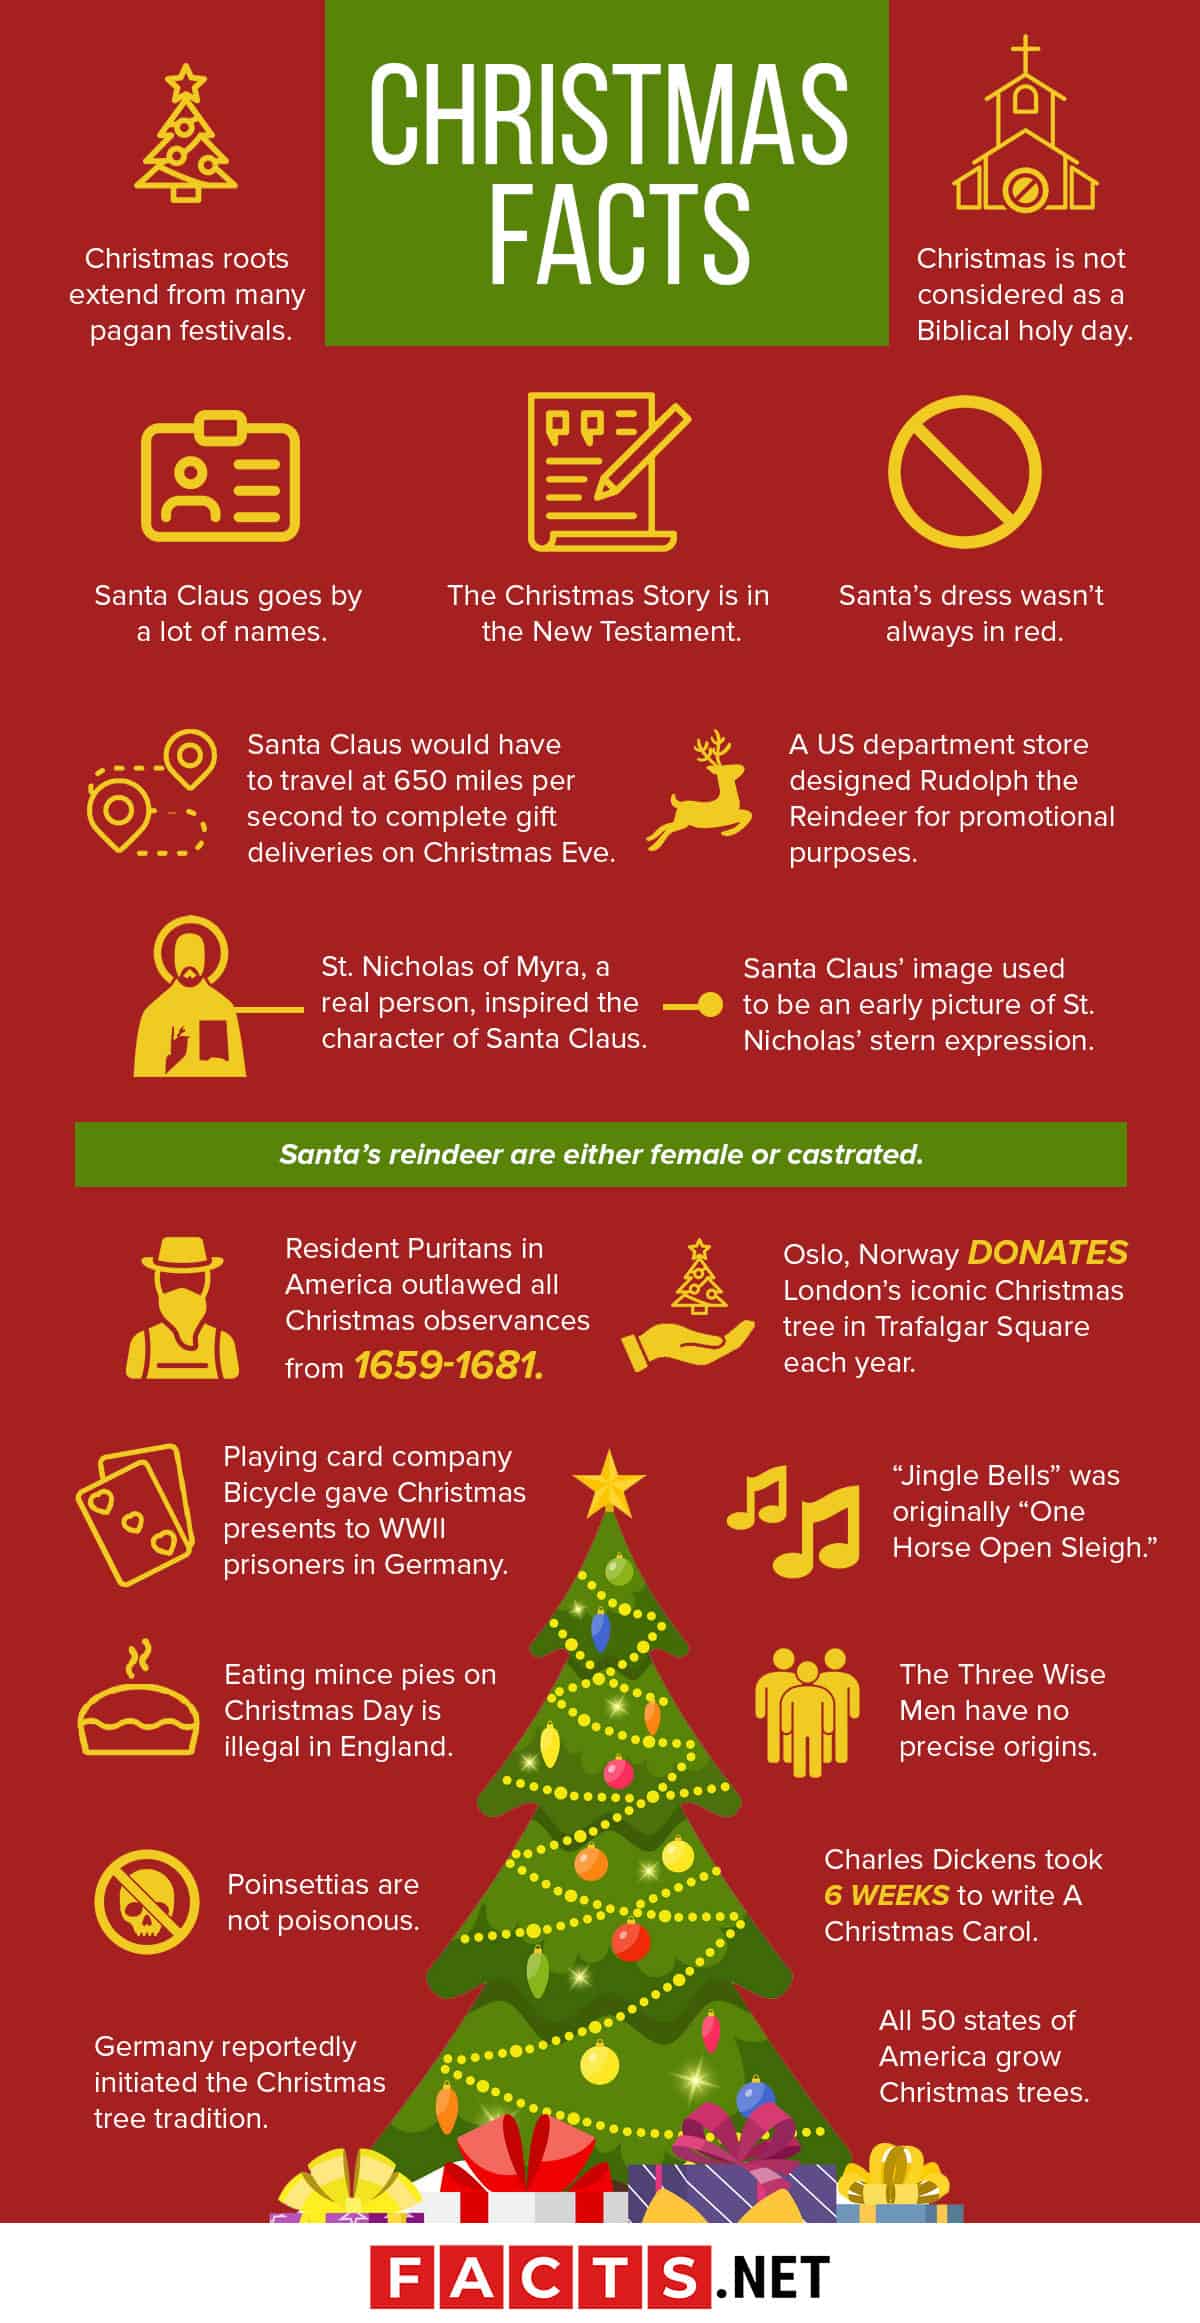 100 Christmas Facts To Celebrate About - Facts.net